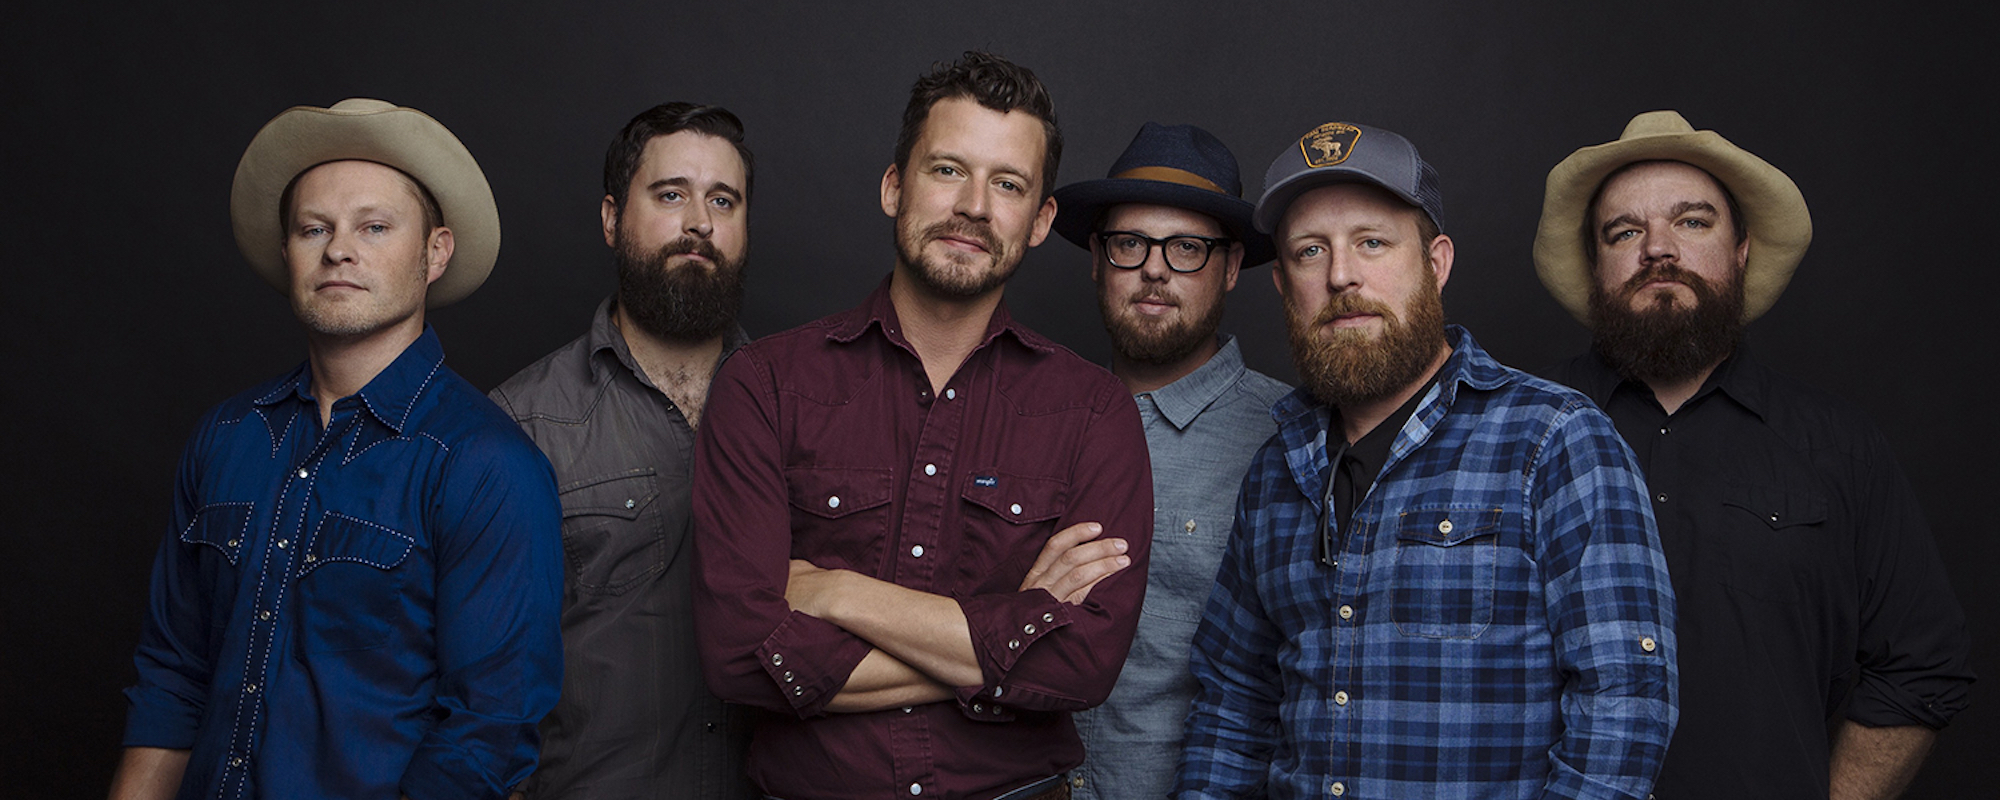 Turnpike Troubadours’ New Track “Brought Me” Is a Love Letter to Fans